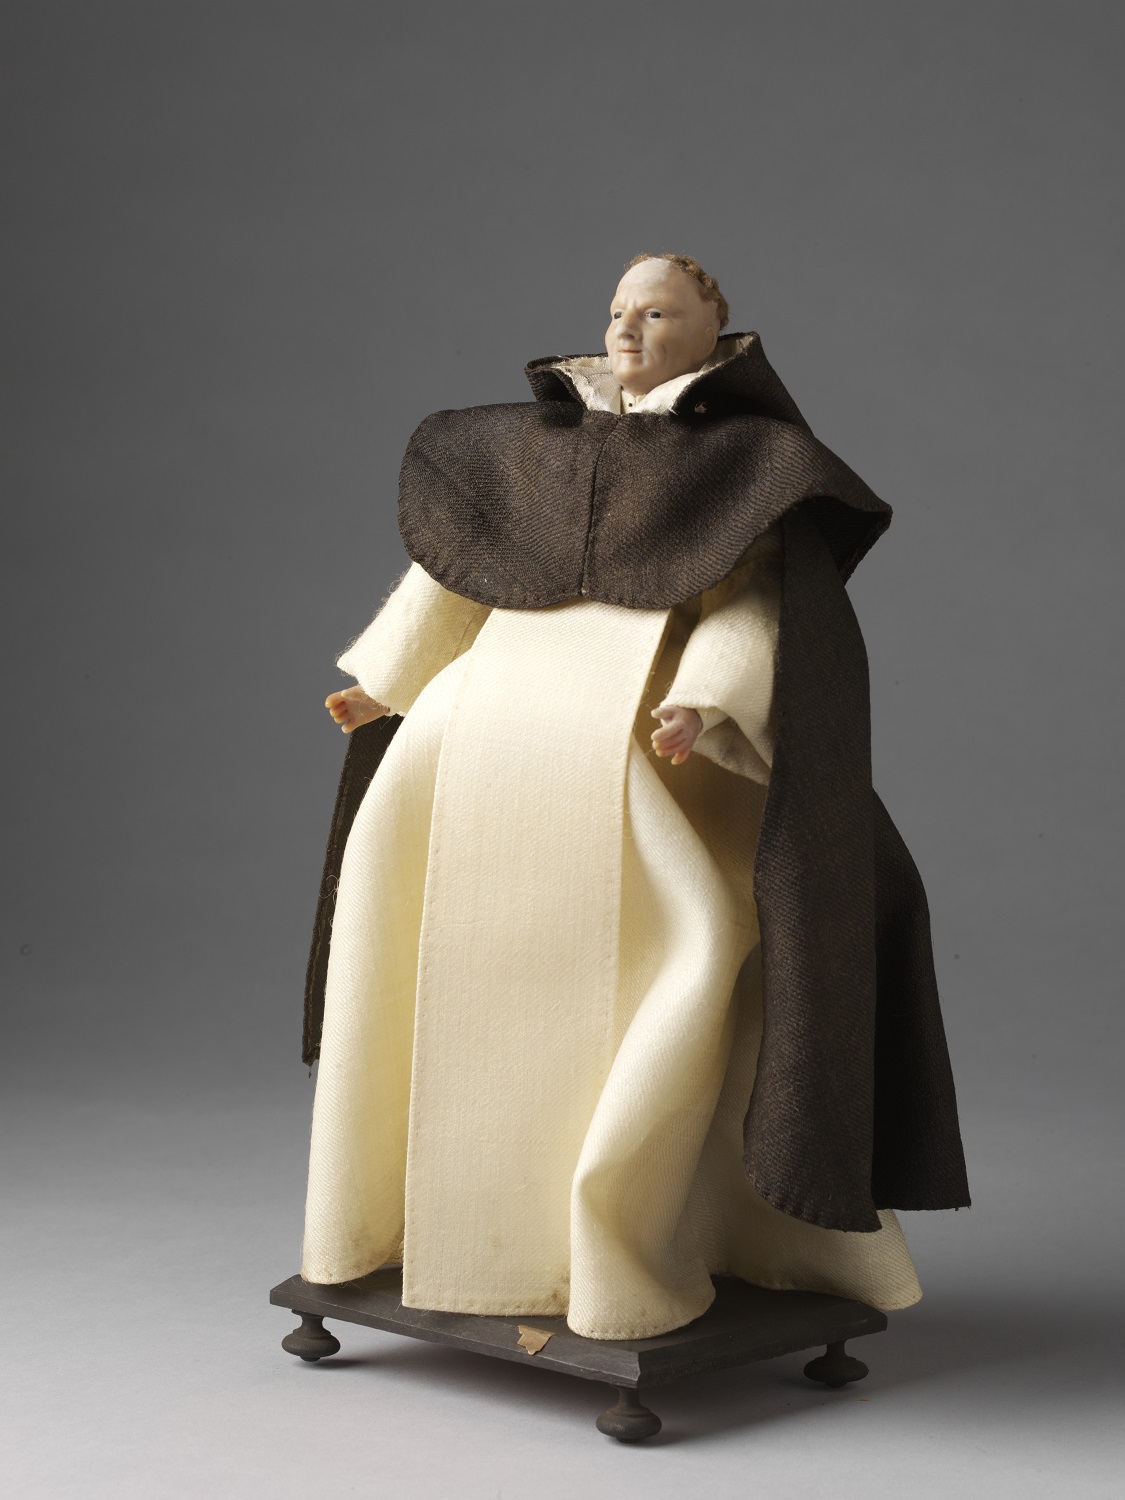 Ecclesiastical figure wearing the habit of a Dominican canon (museum no. 1212:8-1905 © Victoria and Albert Museum, London